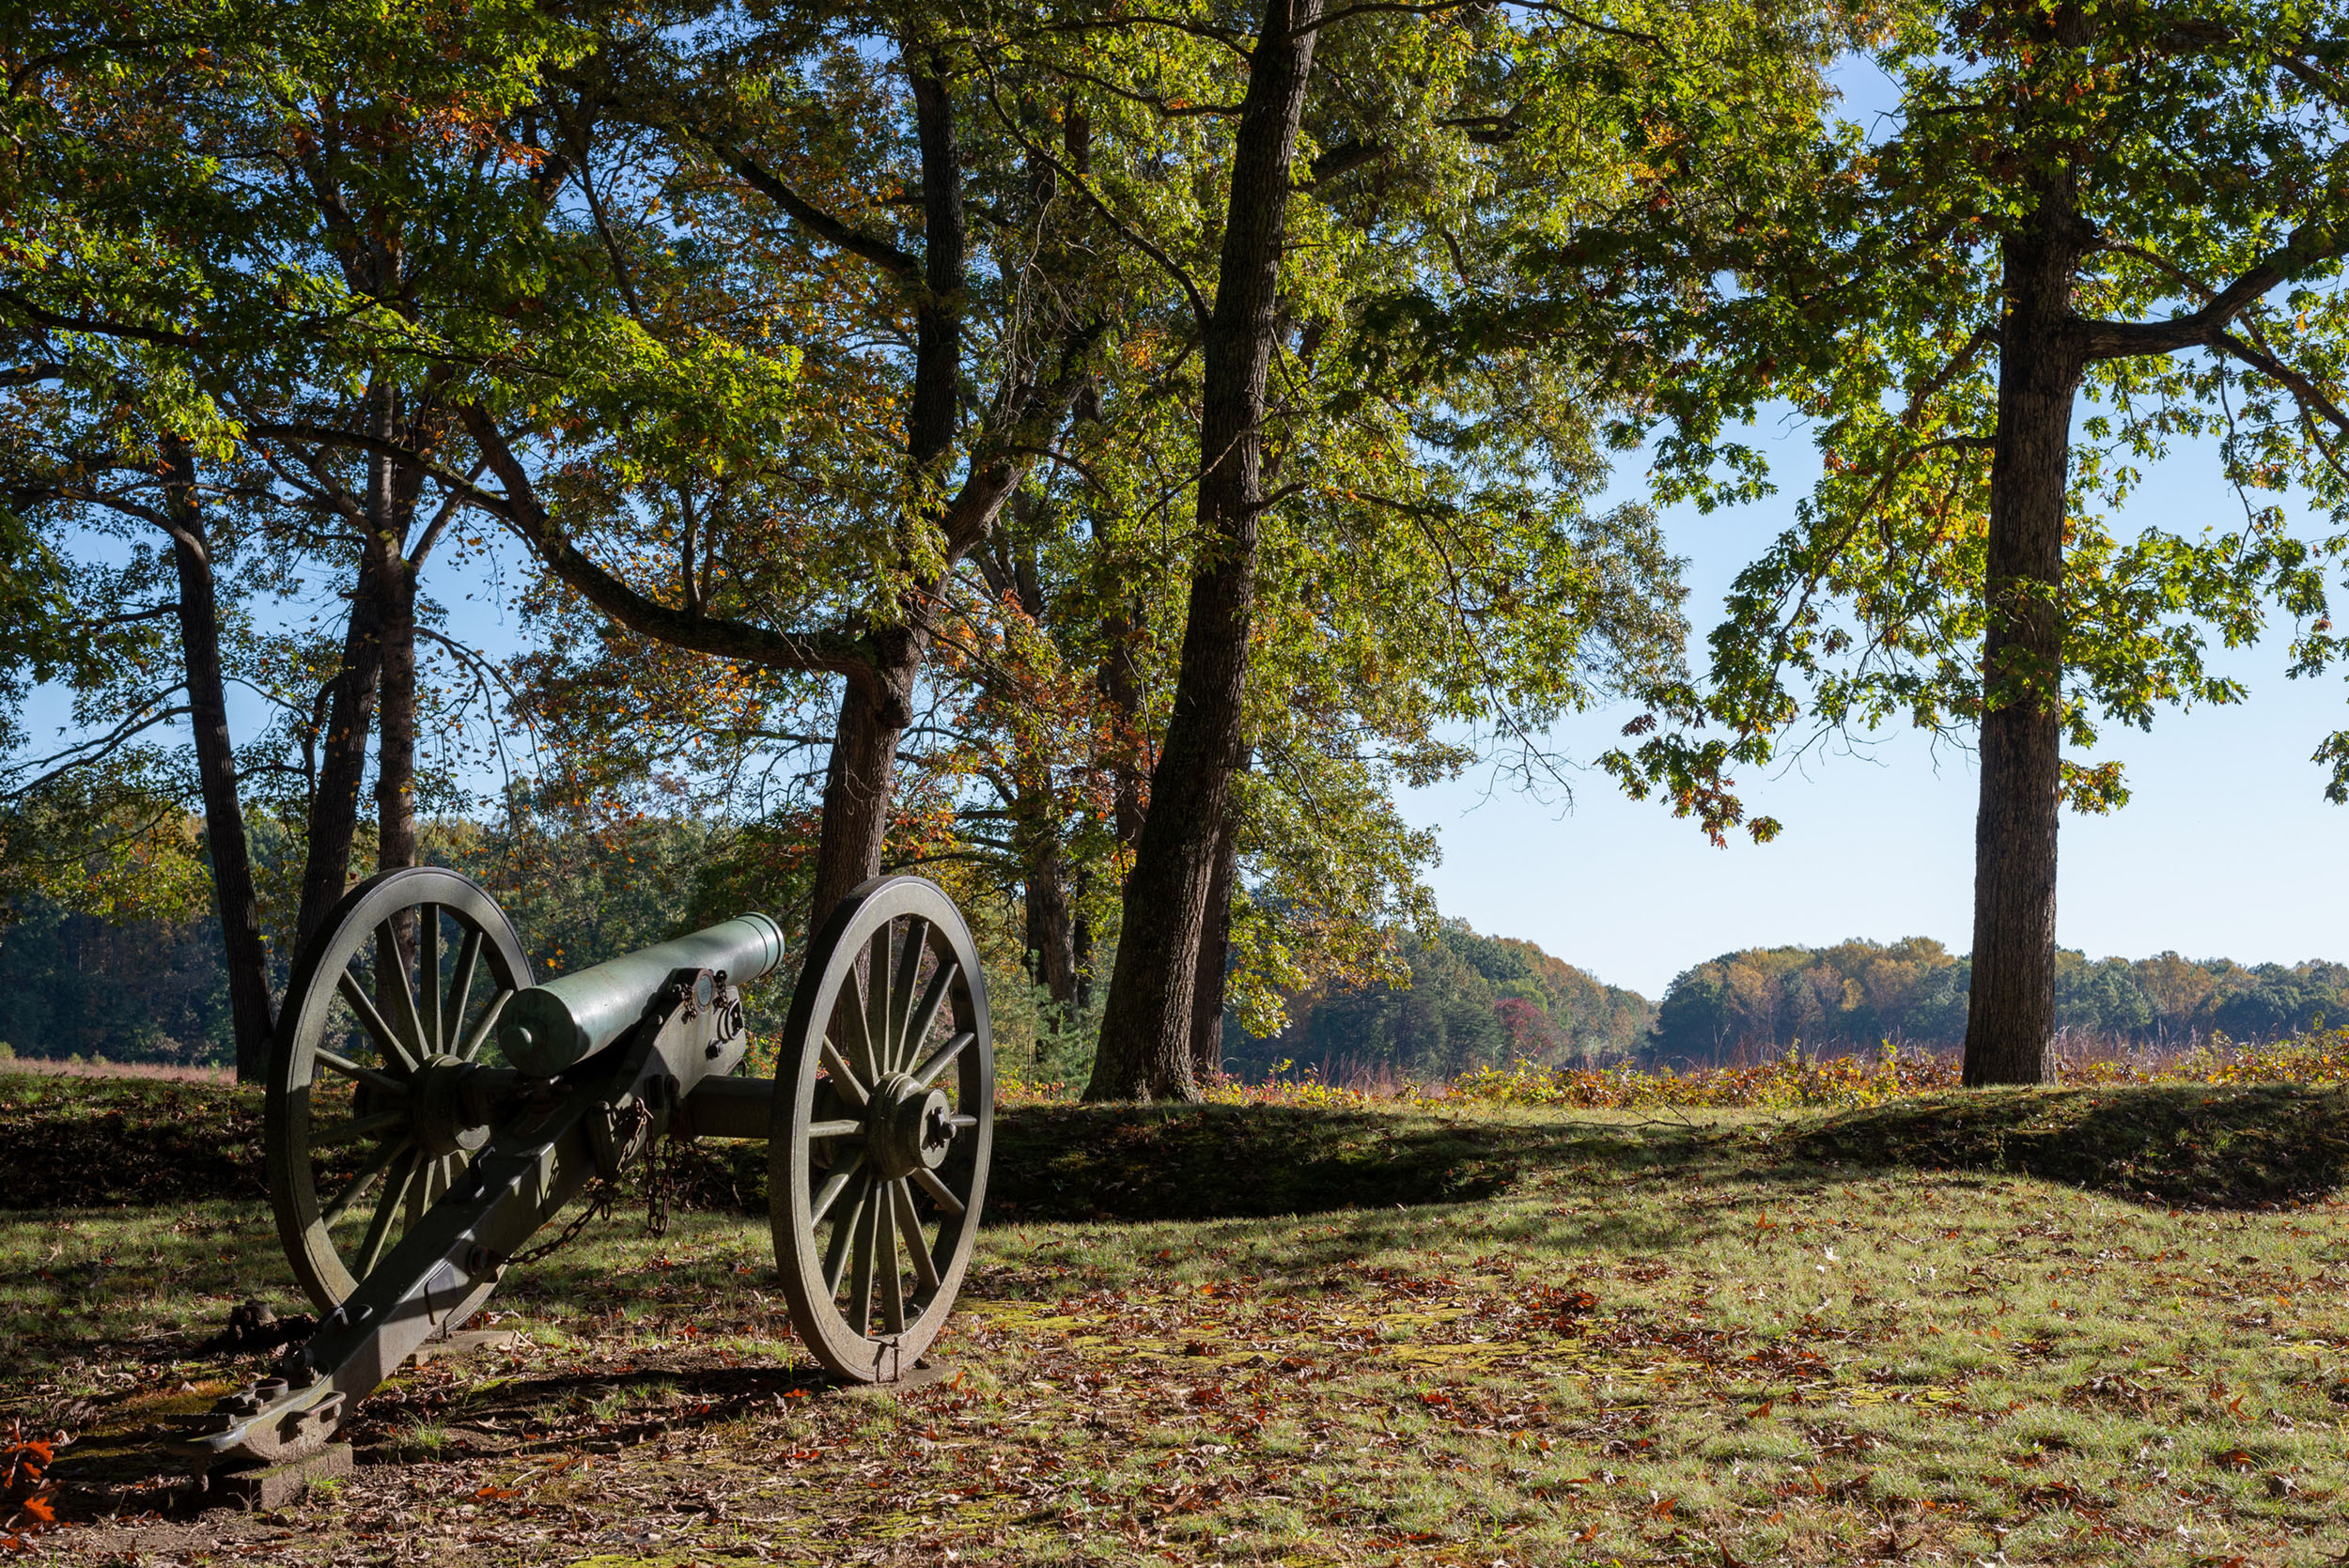 A cannon at the edge of the woods pointed to an open field.